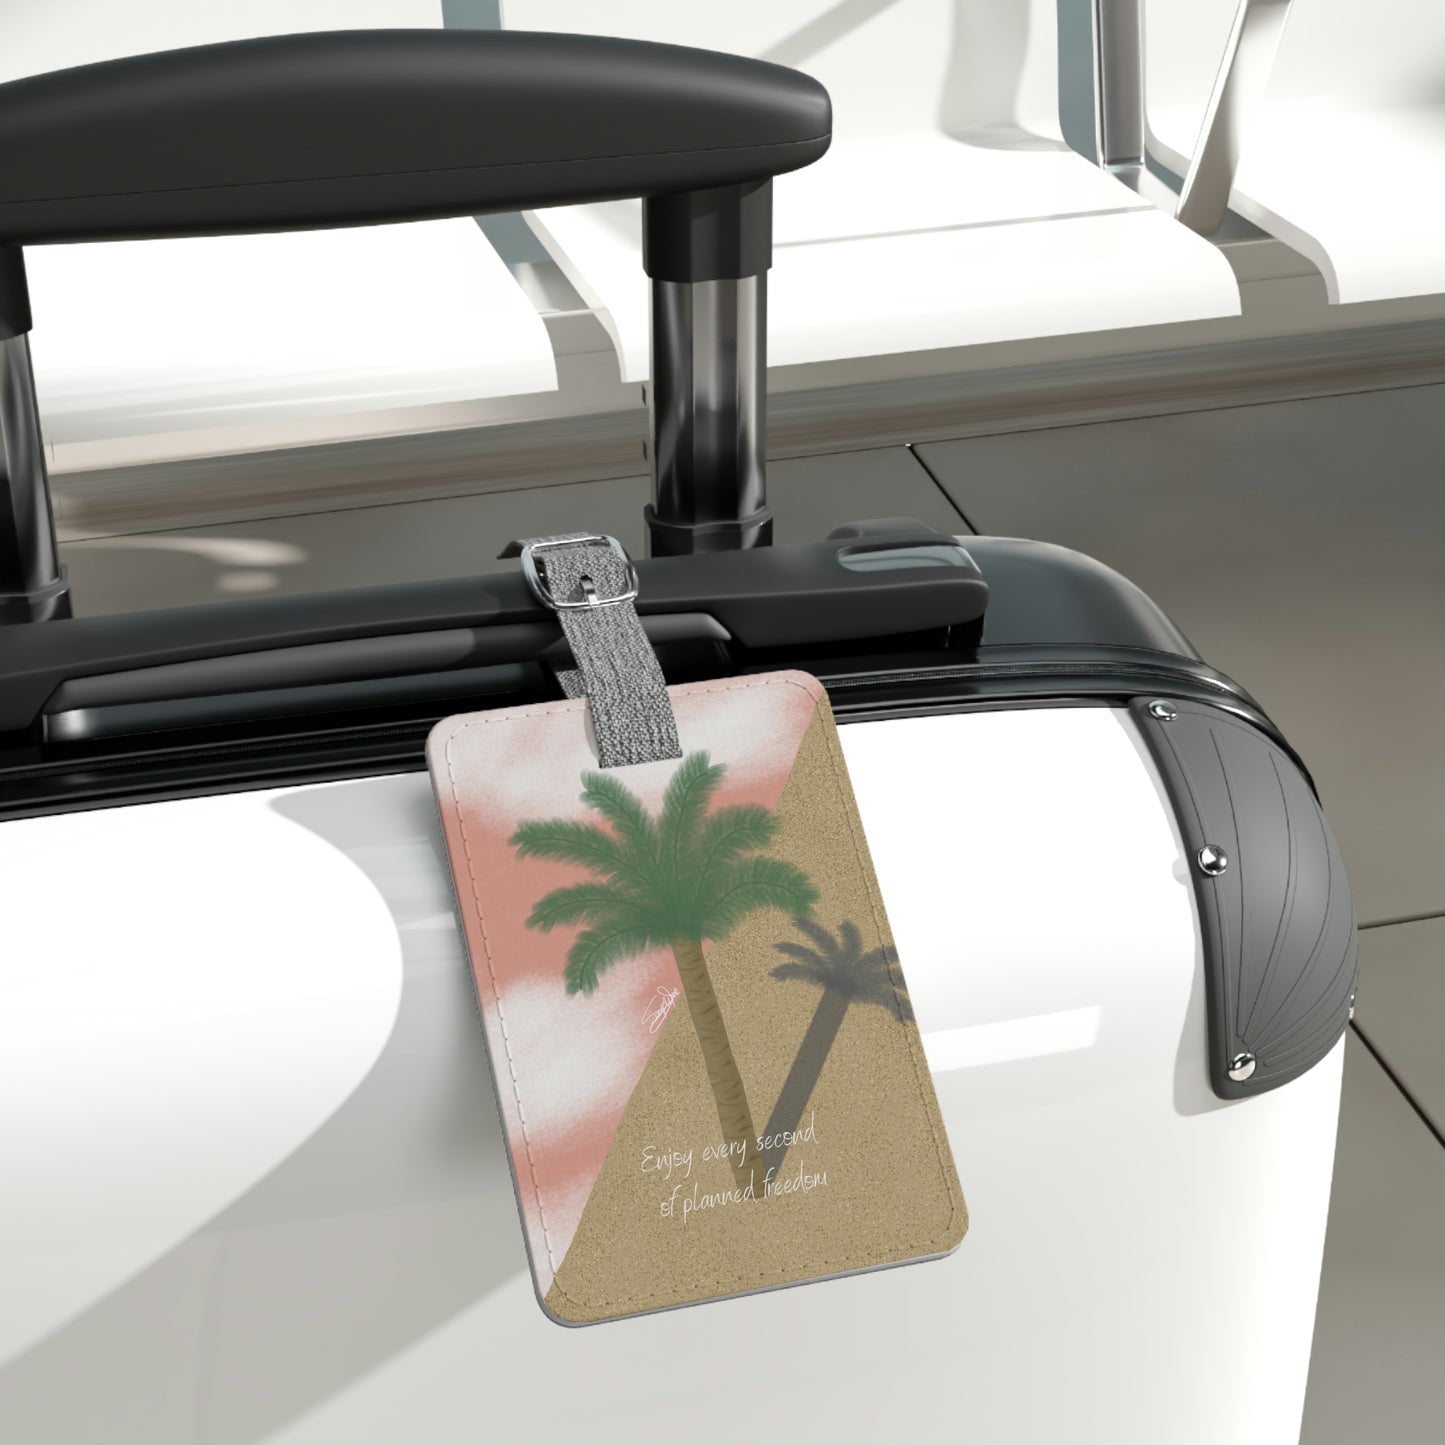 Enjoy every second of planned freedom - Saffiano Polyester Luggage Tag, Rectangle